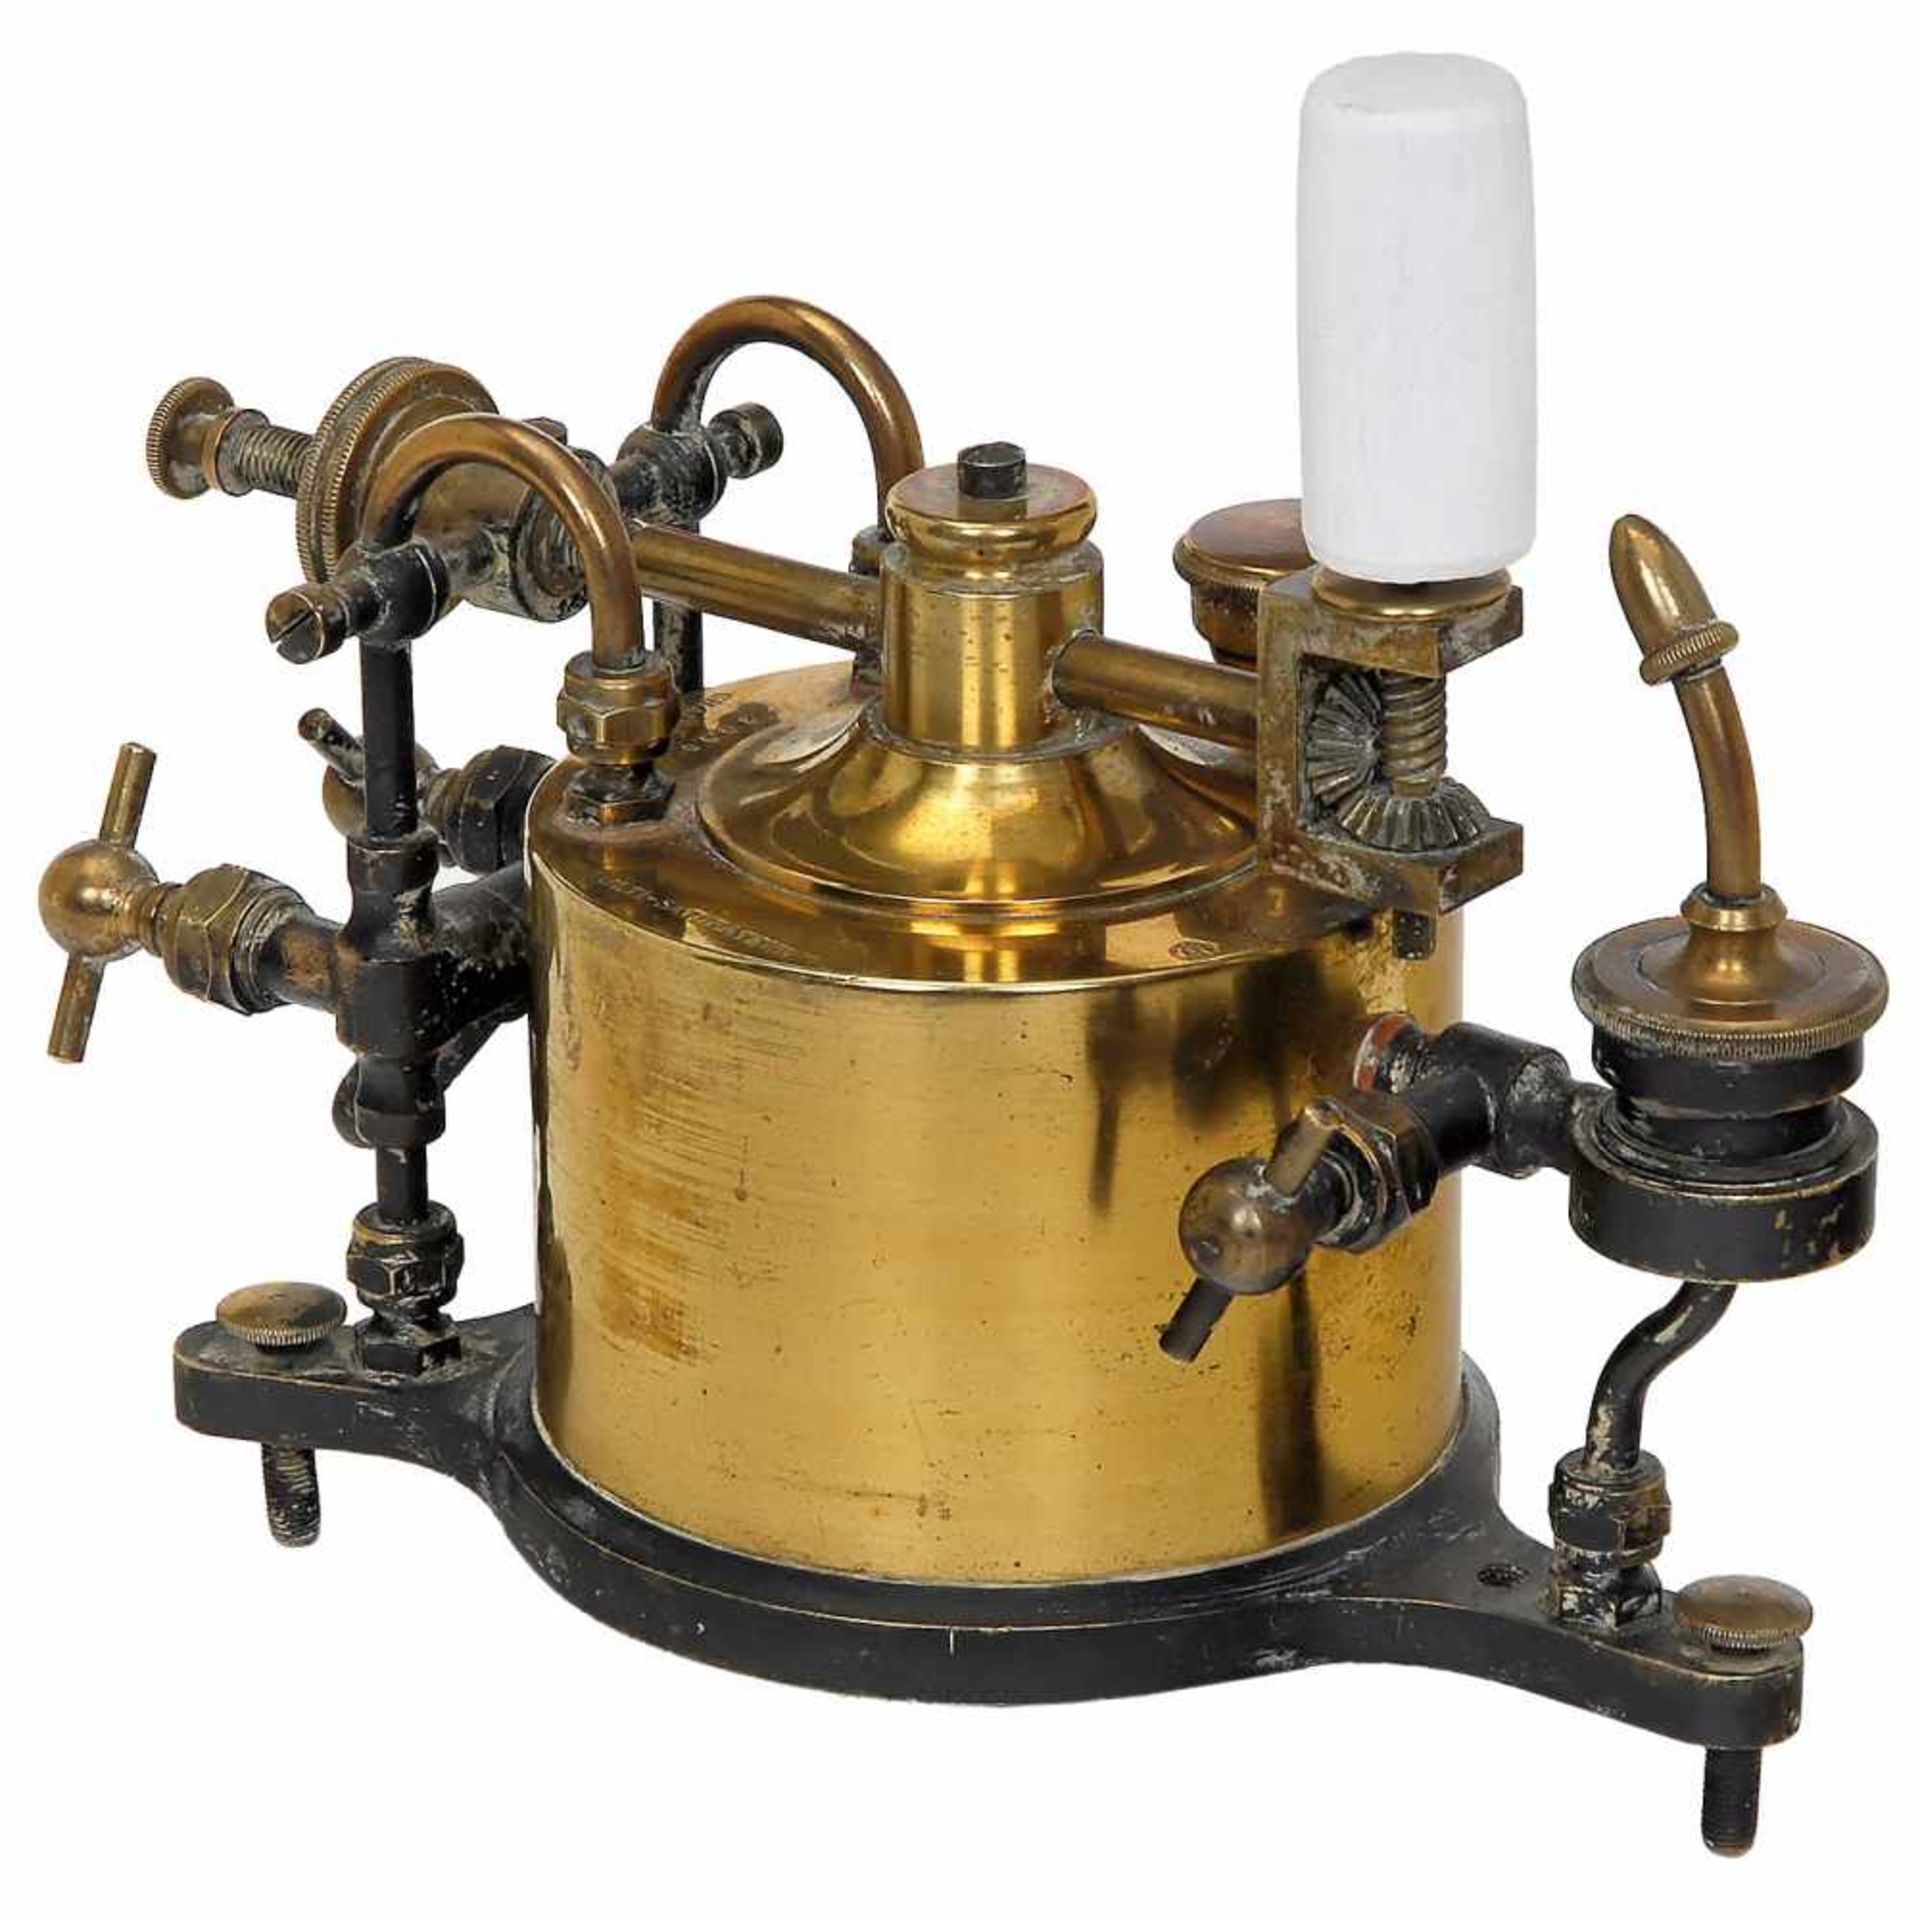 A French Brass "Securitas" Optical Projection Lantern by Alfred Molteni, c. 1895